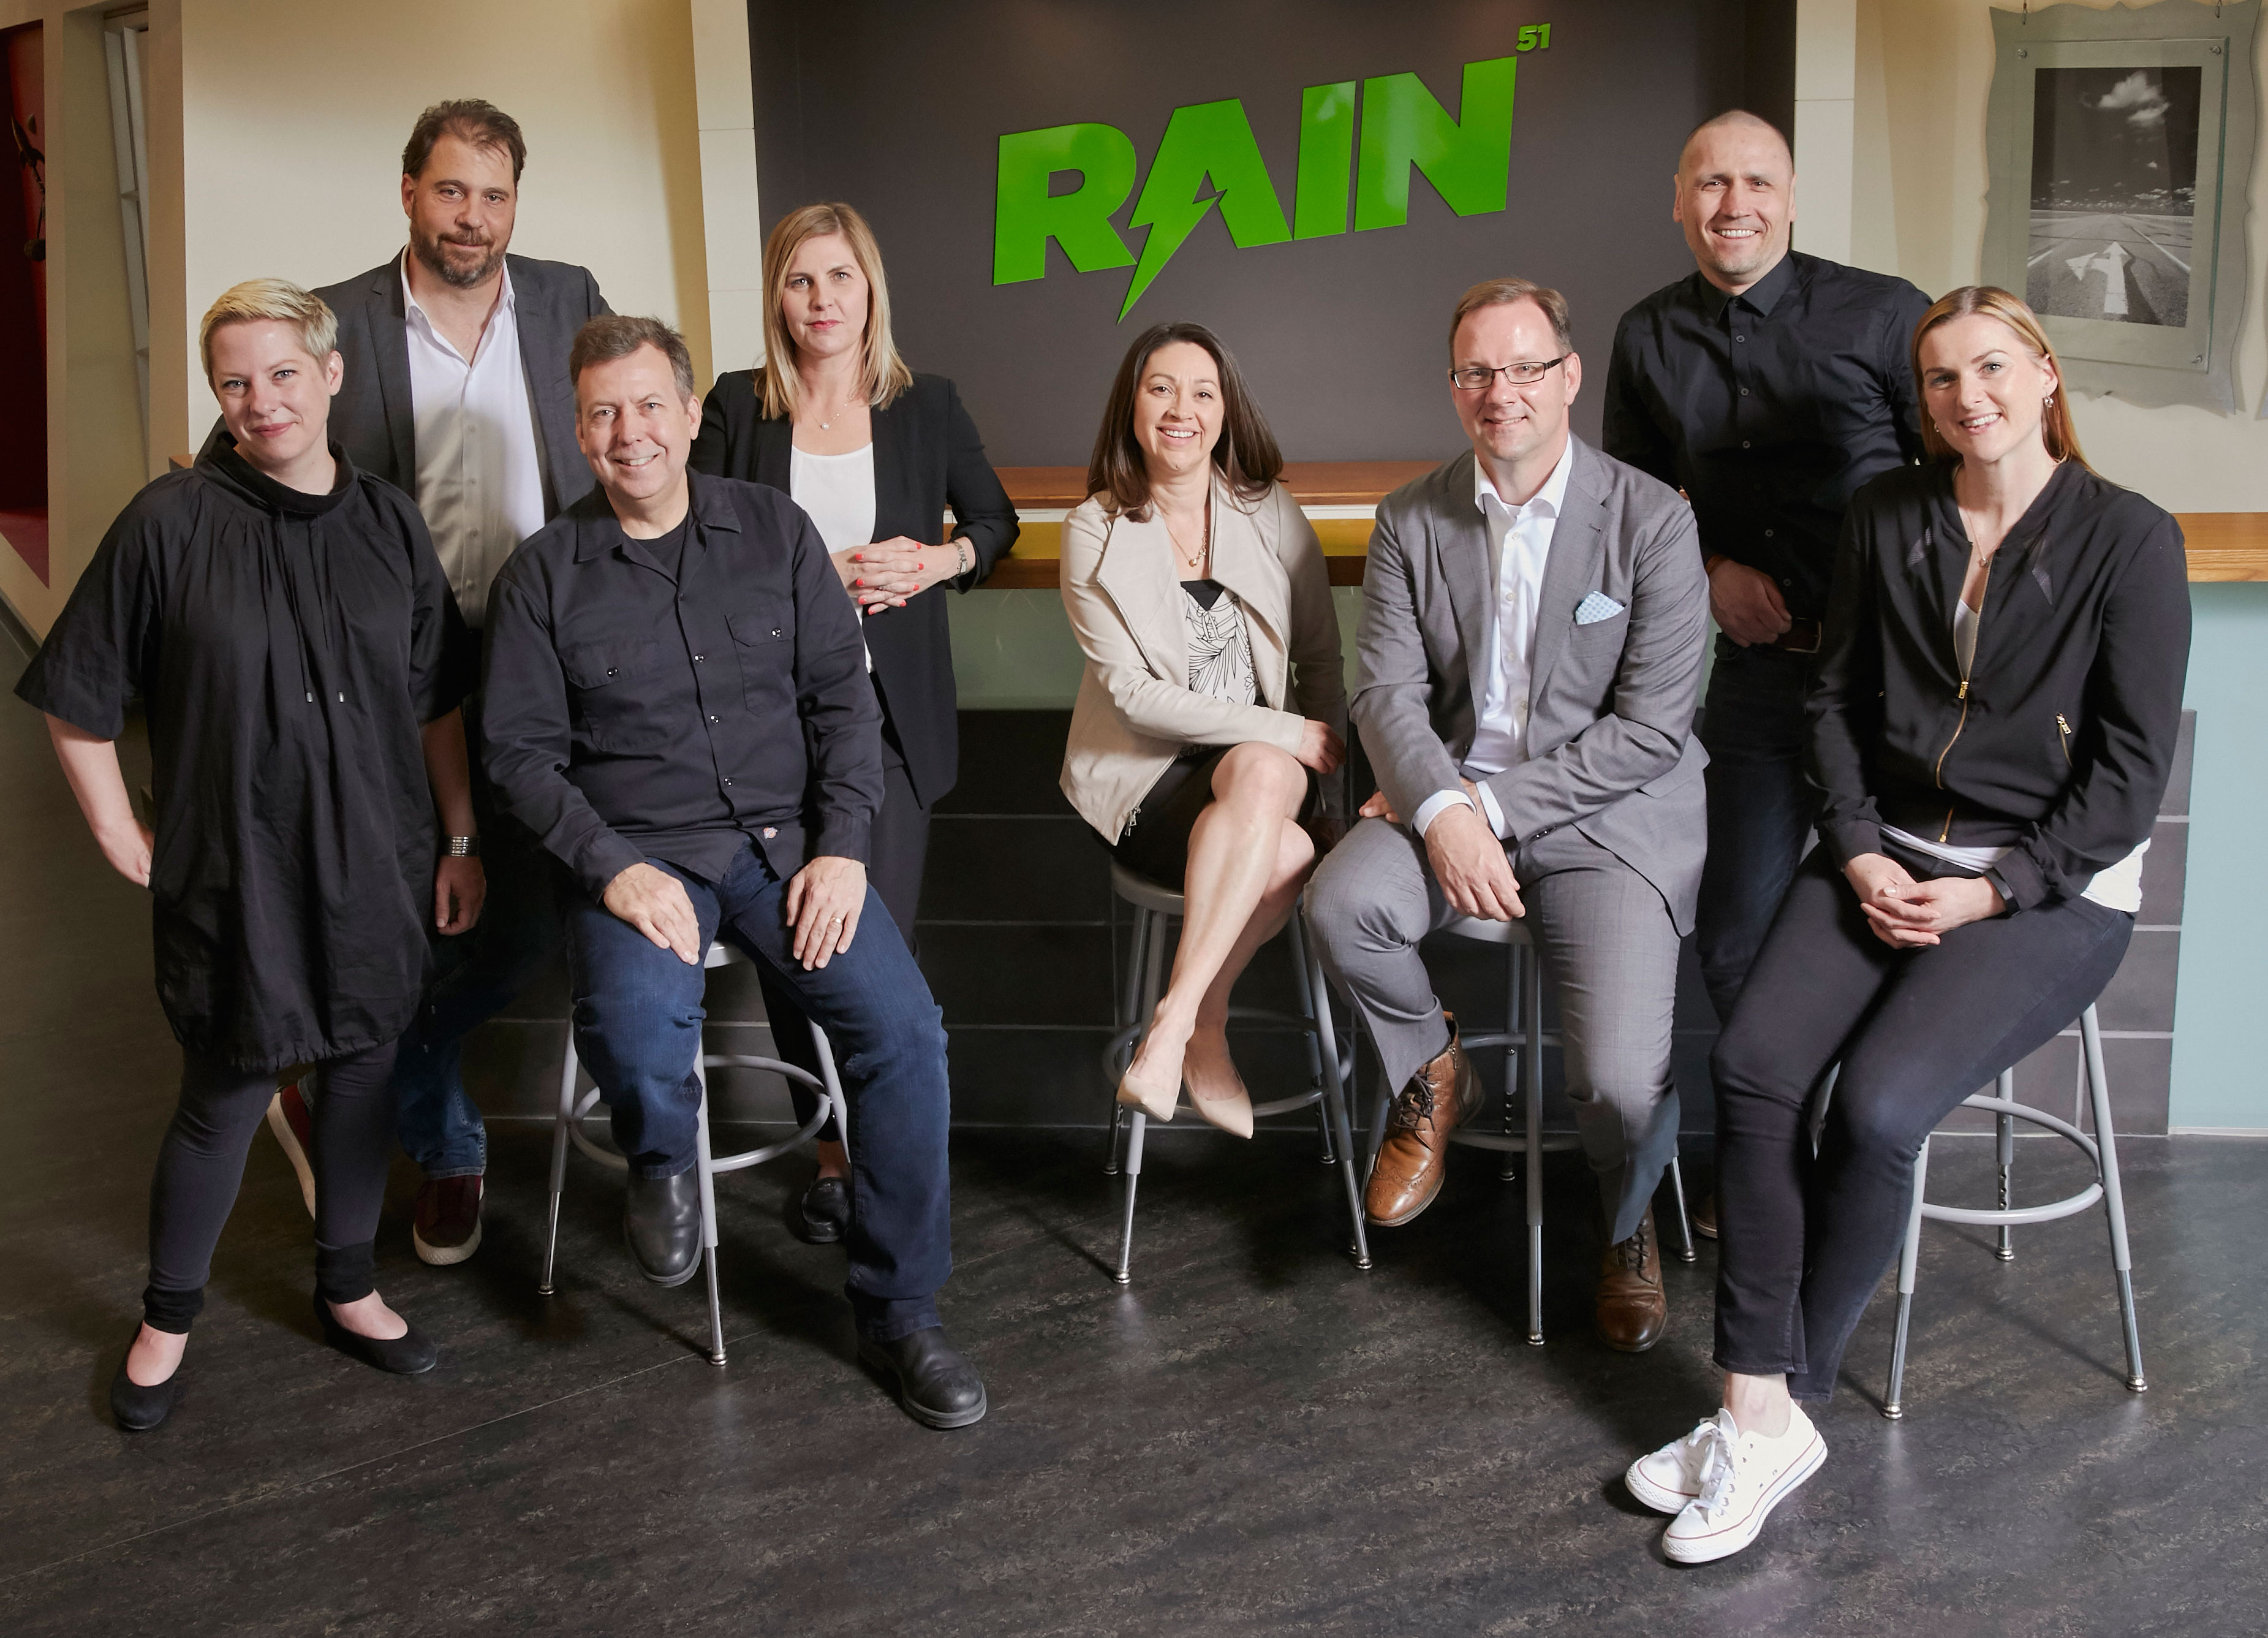 Left to right: Jane Murray, VP, Executive Creative Director; John Yorke, President & CEO; Dave Stubbs, VP, Executive Creative Director; Christine McNab, General Manager; Tracy Gonzalez, VP, Managing Director; Dennis Cant, VP, Client Development; Duncan Porter, VP, Executive Creative Director; Laura Davis-Saville, Vice President, Strategy